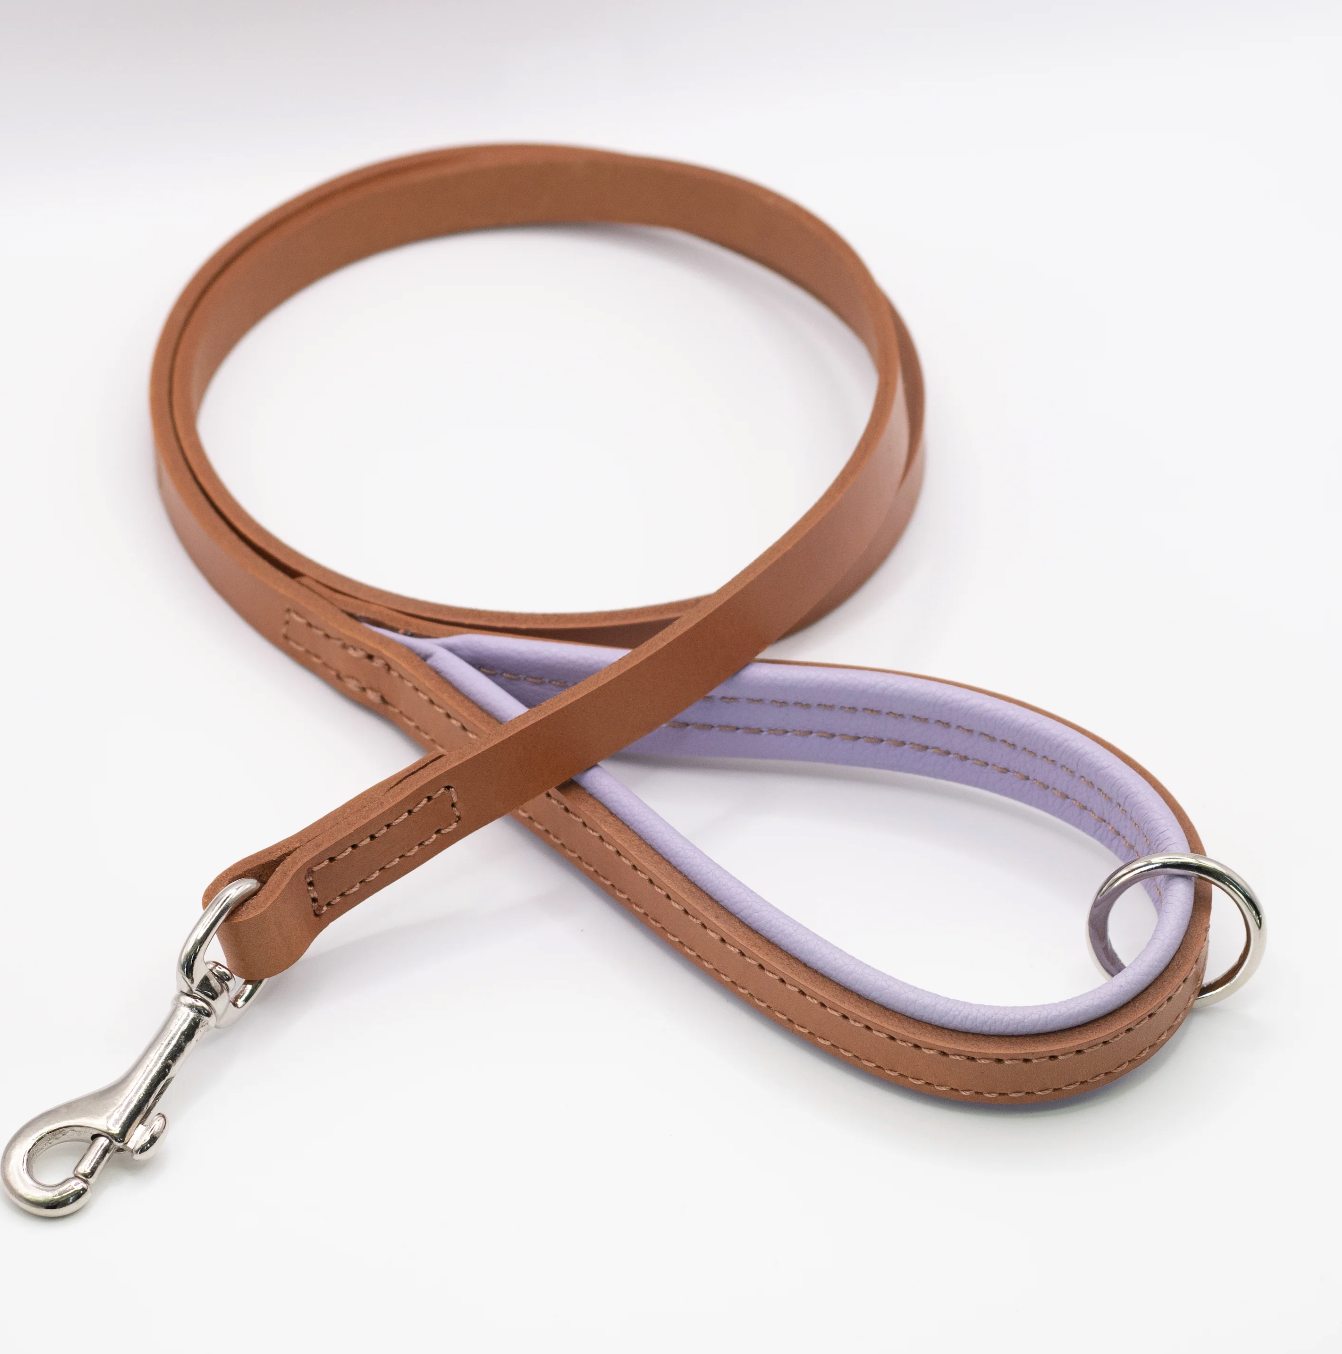 Padded Leather Dog Lead Tan and Lilac